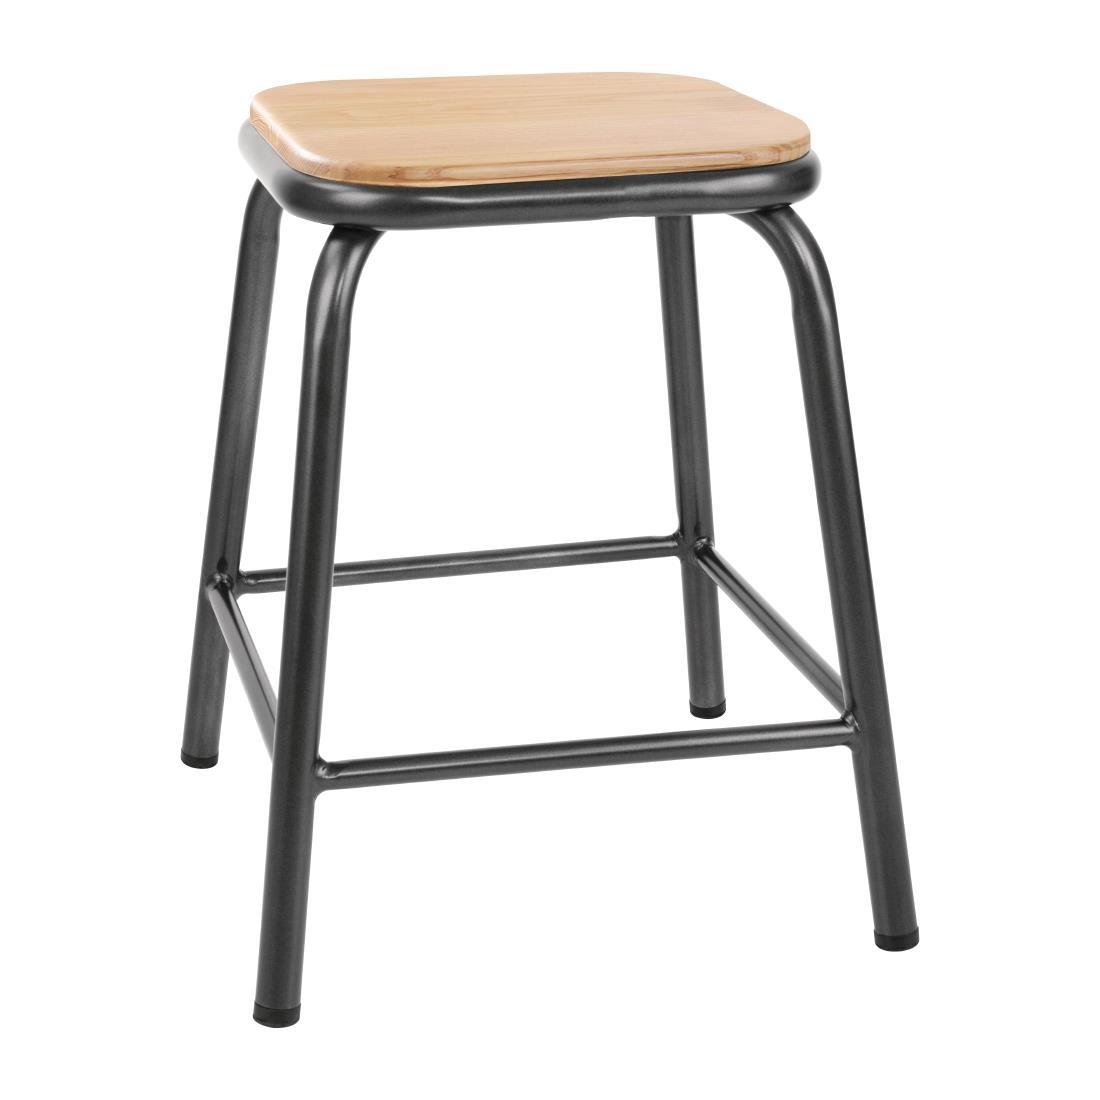 Bolero Cantina Low Stools with Wooden Seat Pad Metallic Grey (Pack of 4) - FB930  - 1